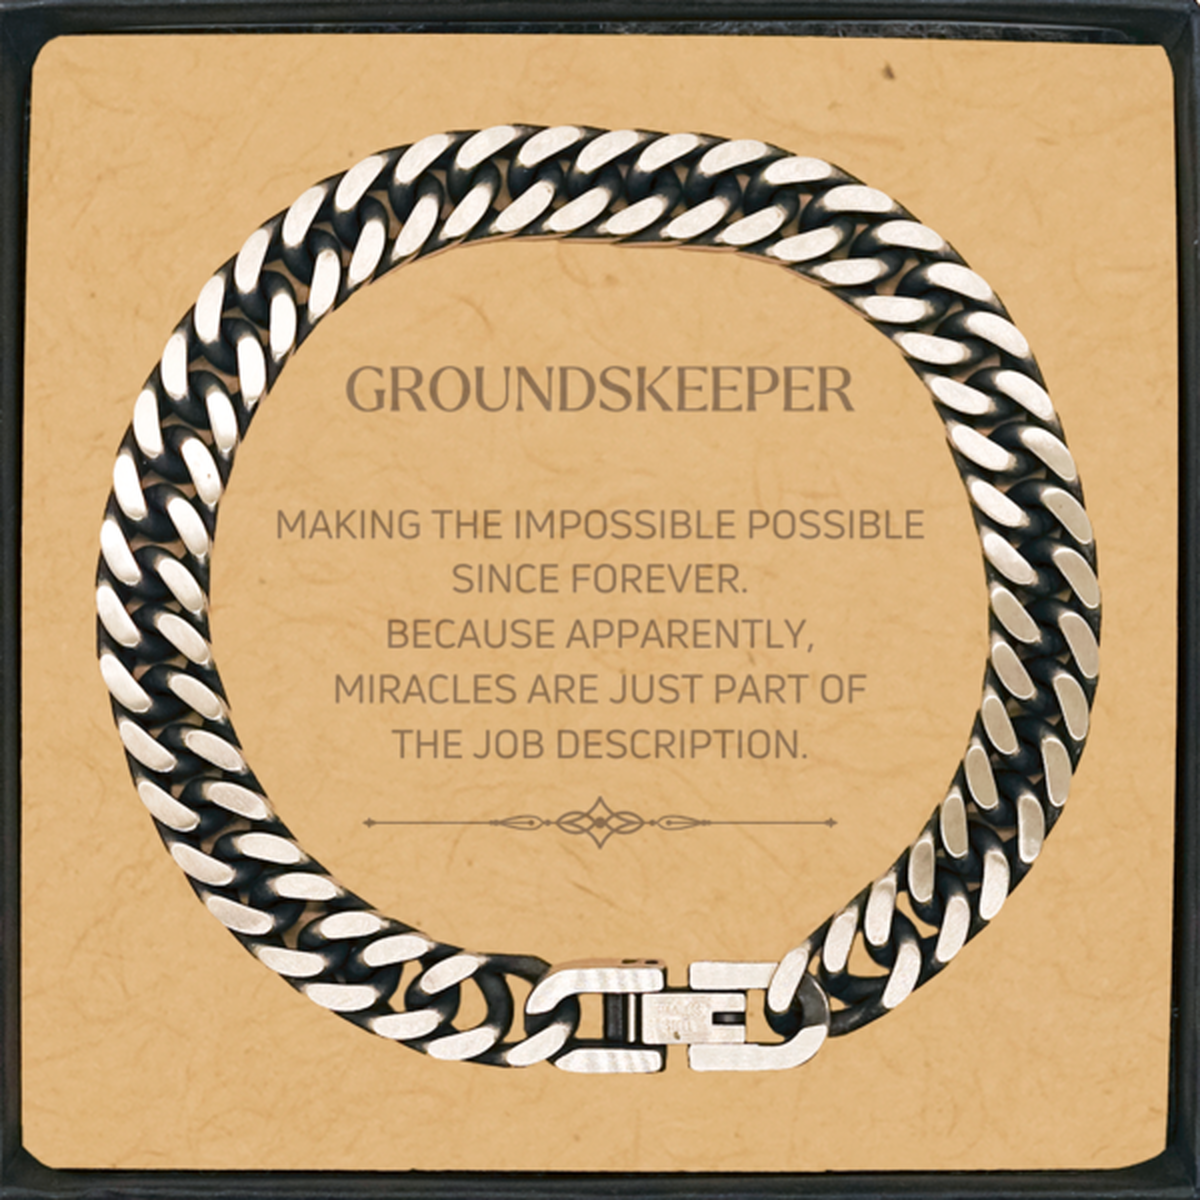 Funny Groundskeeper Gifts, Miracles are just part of the job description, Inspirational Birthday Cuban Link Chain Bracelet For Groundskeeper, Men, Women, Coworkers, Friends, Boss